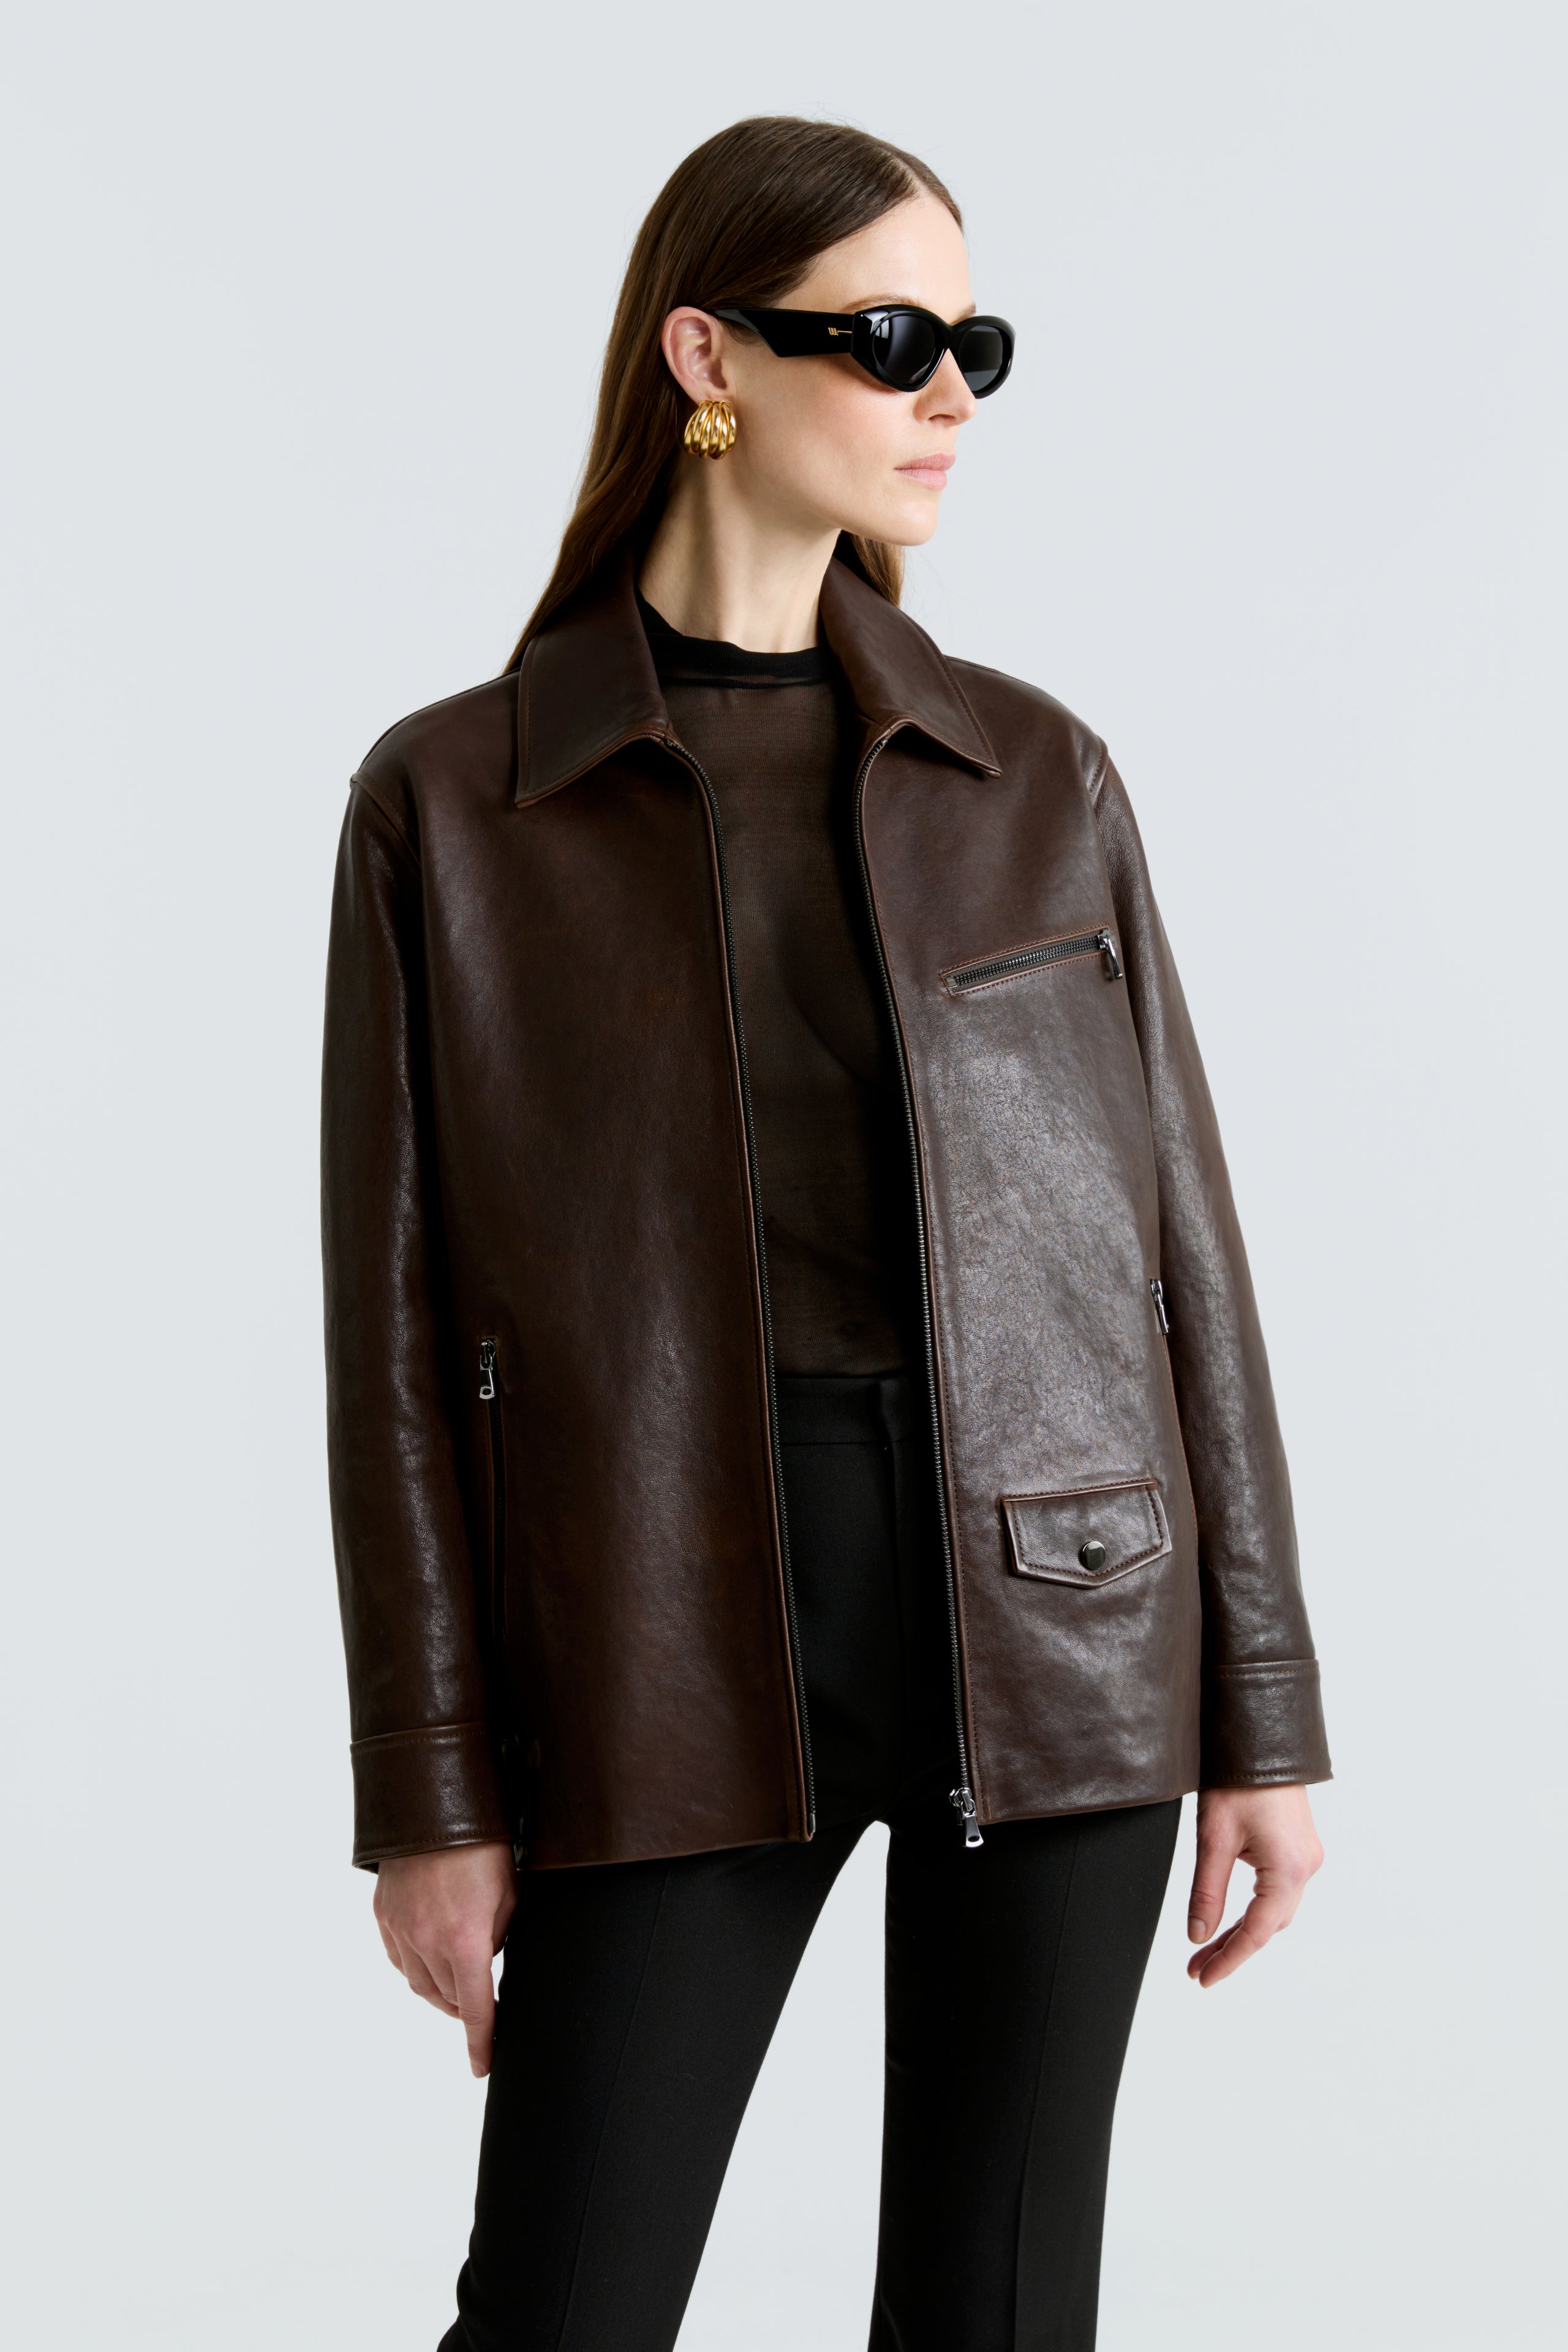 Model is wearing the Rayan Dark Brown Utilitarian Leather Jacket Close Up